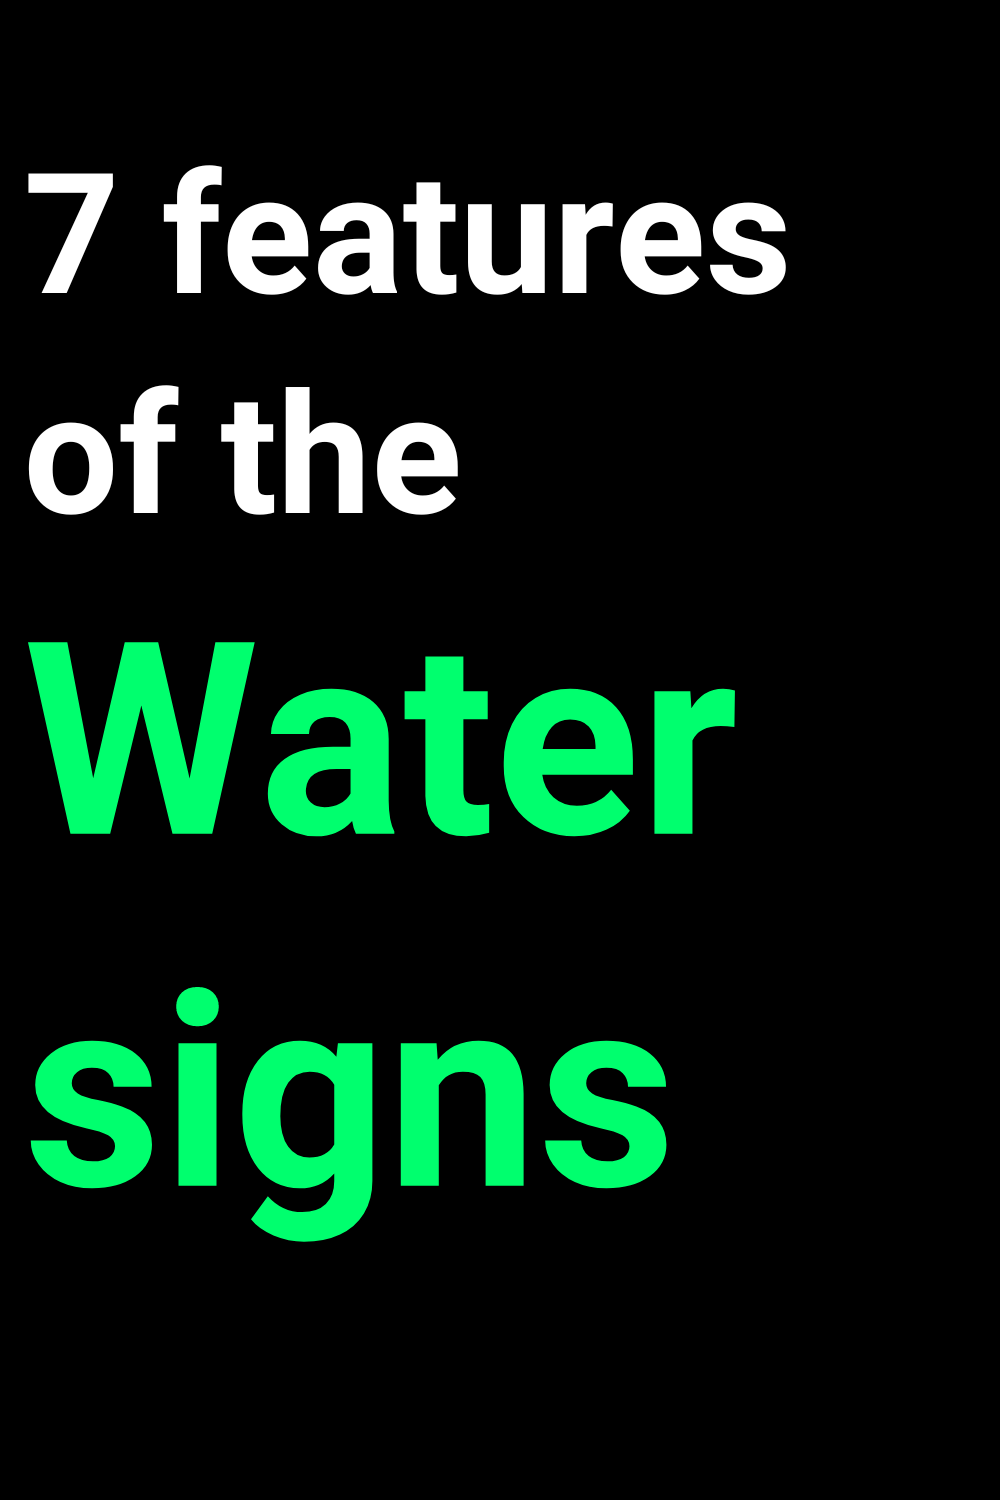 7 features of the Water signs